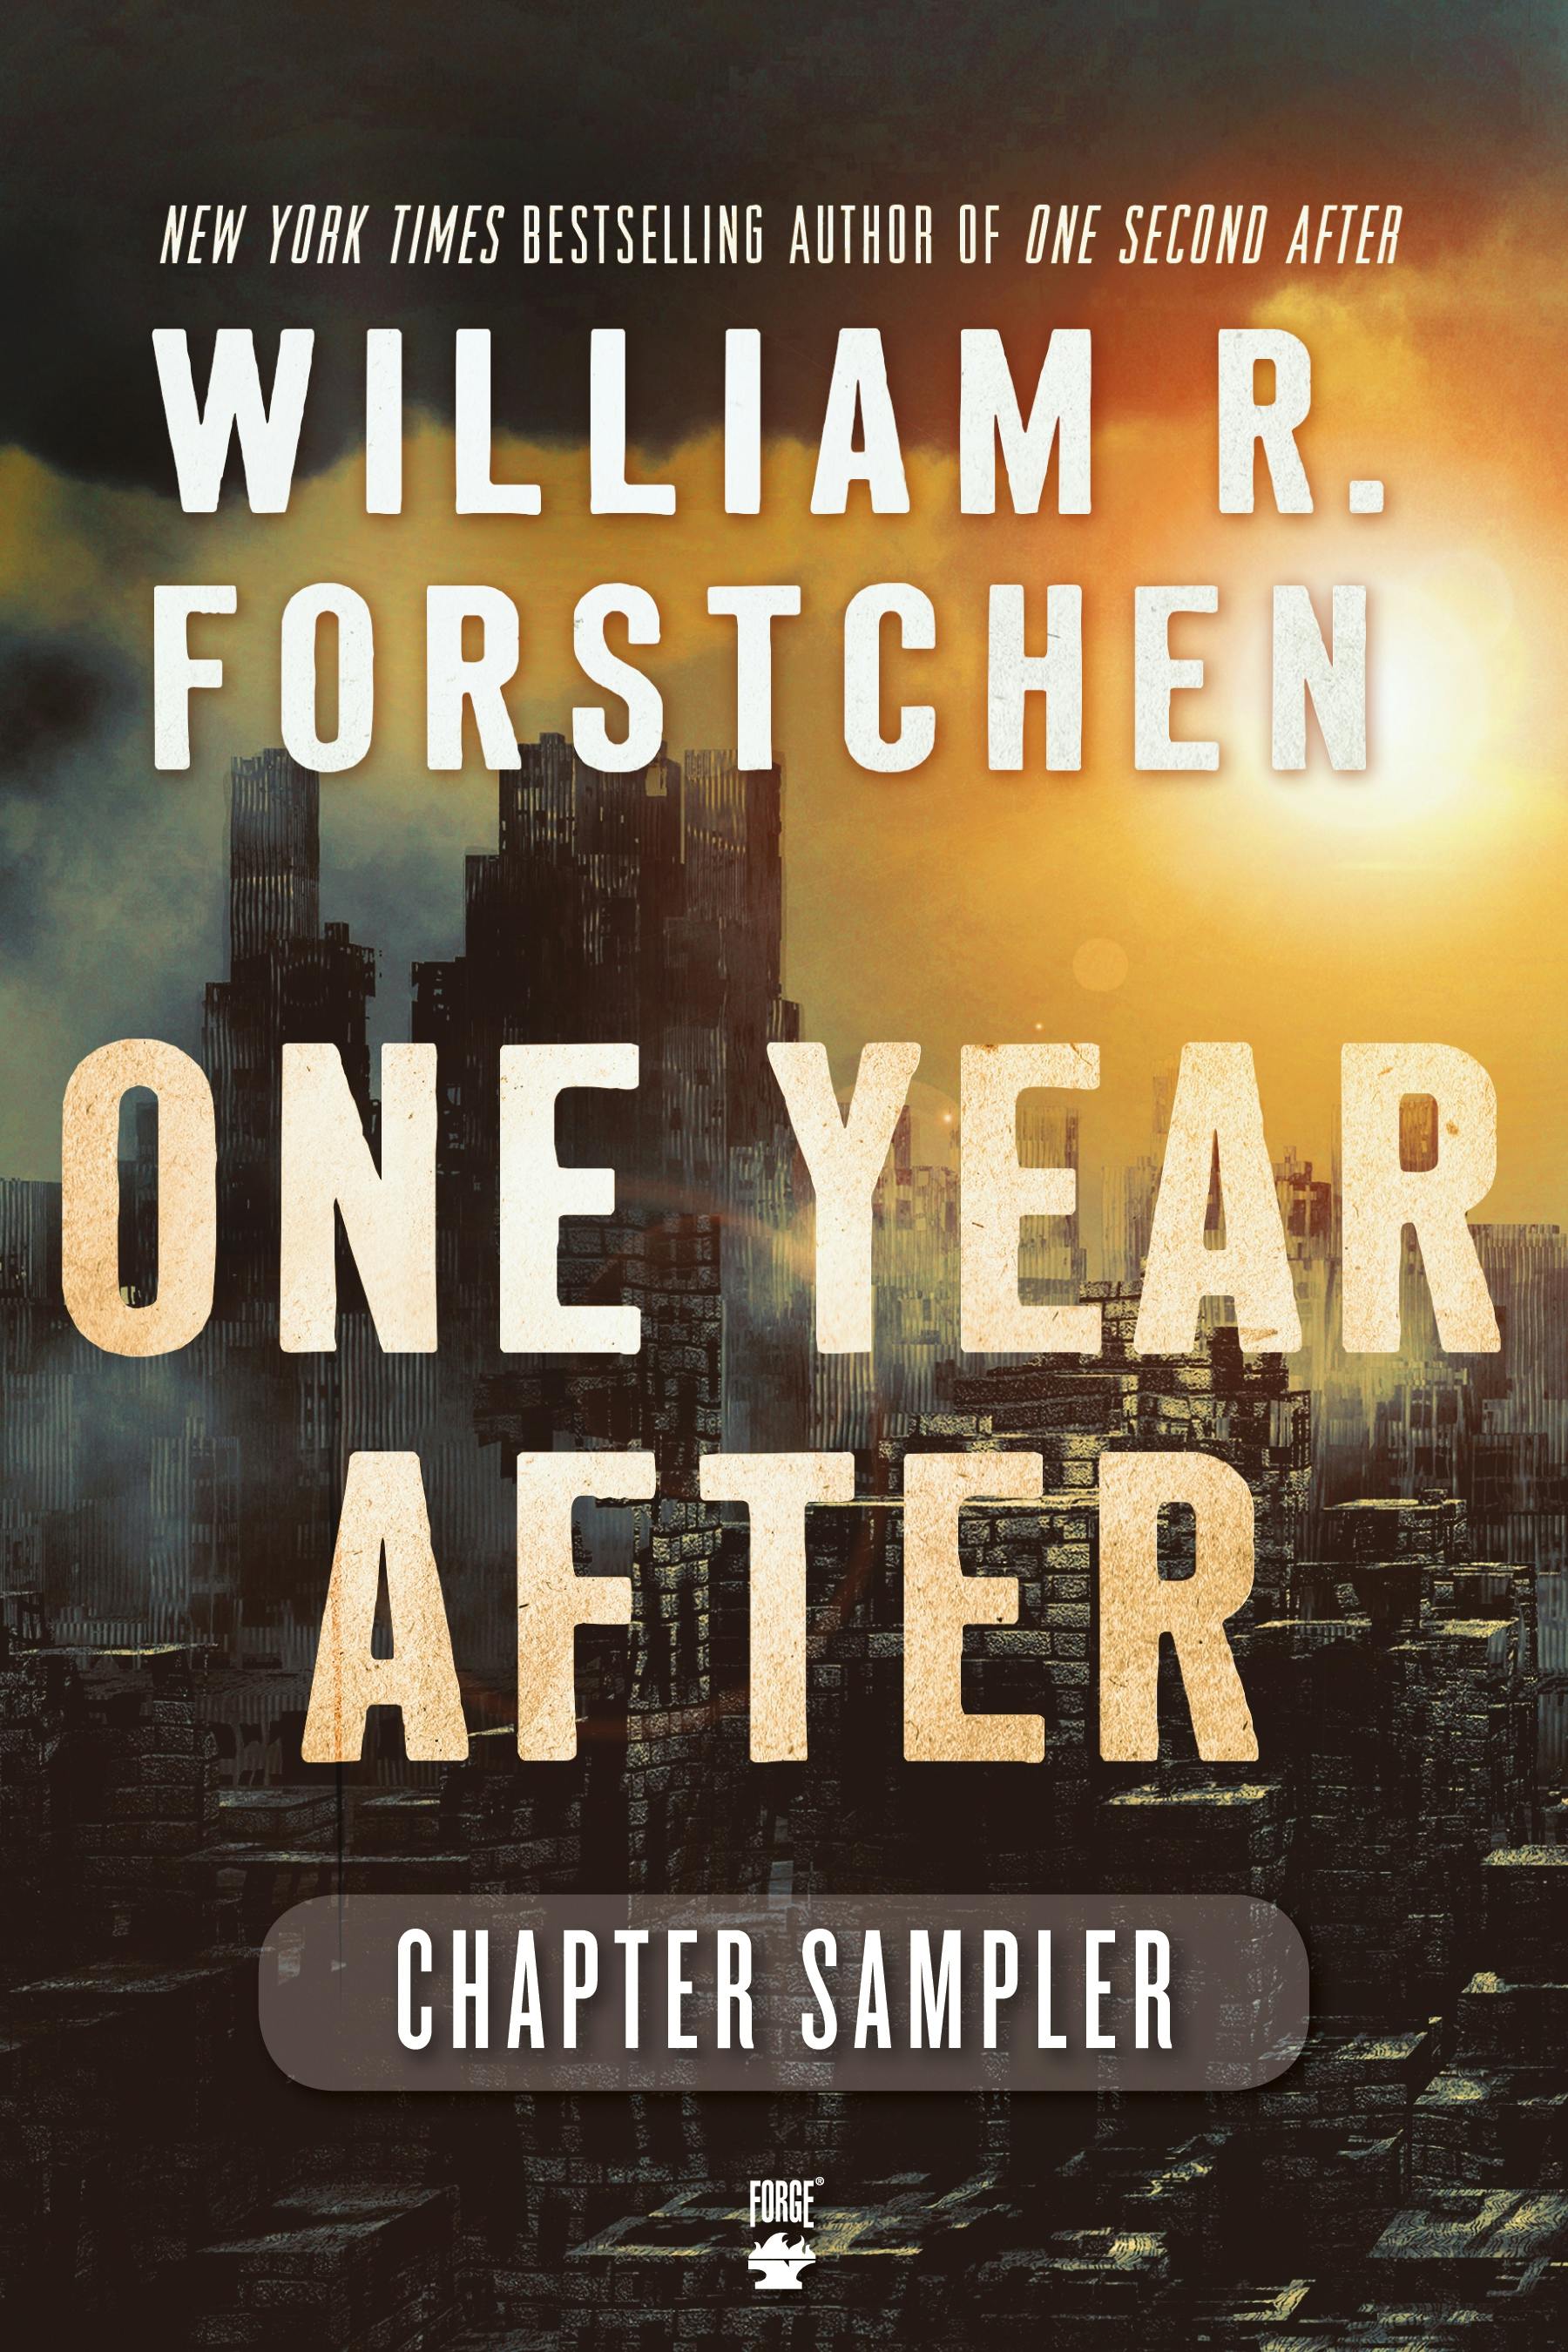 Cover for the book titled as: One Year After Chapter Sampler